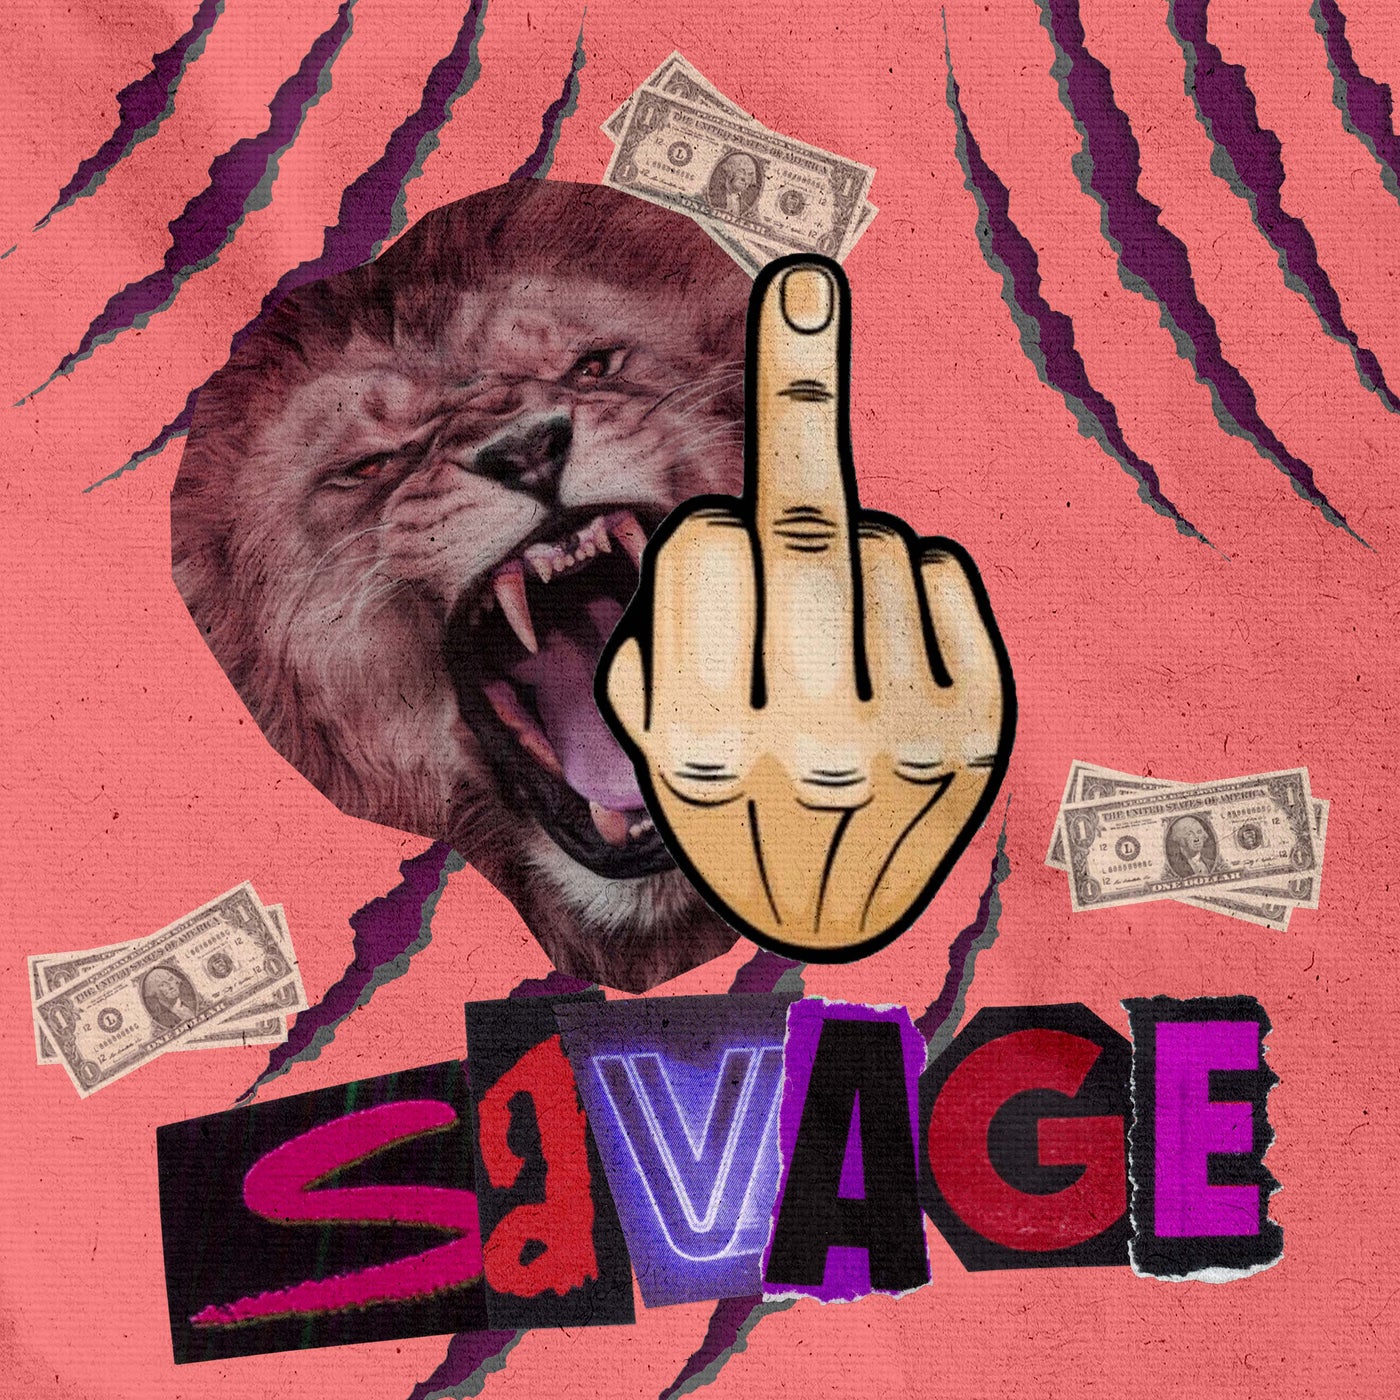 Savage (Extended Mix)